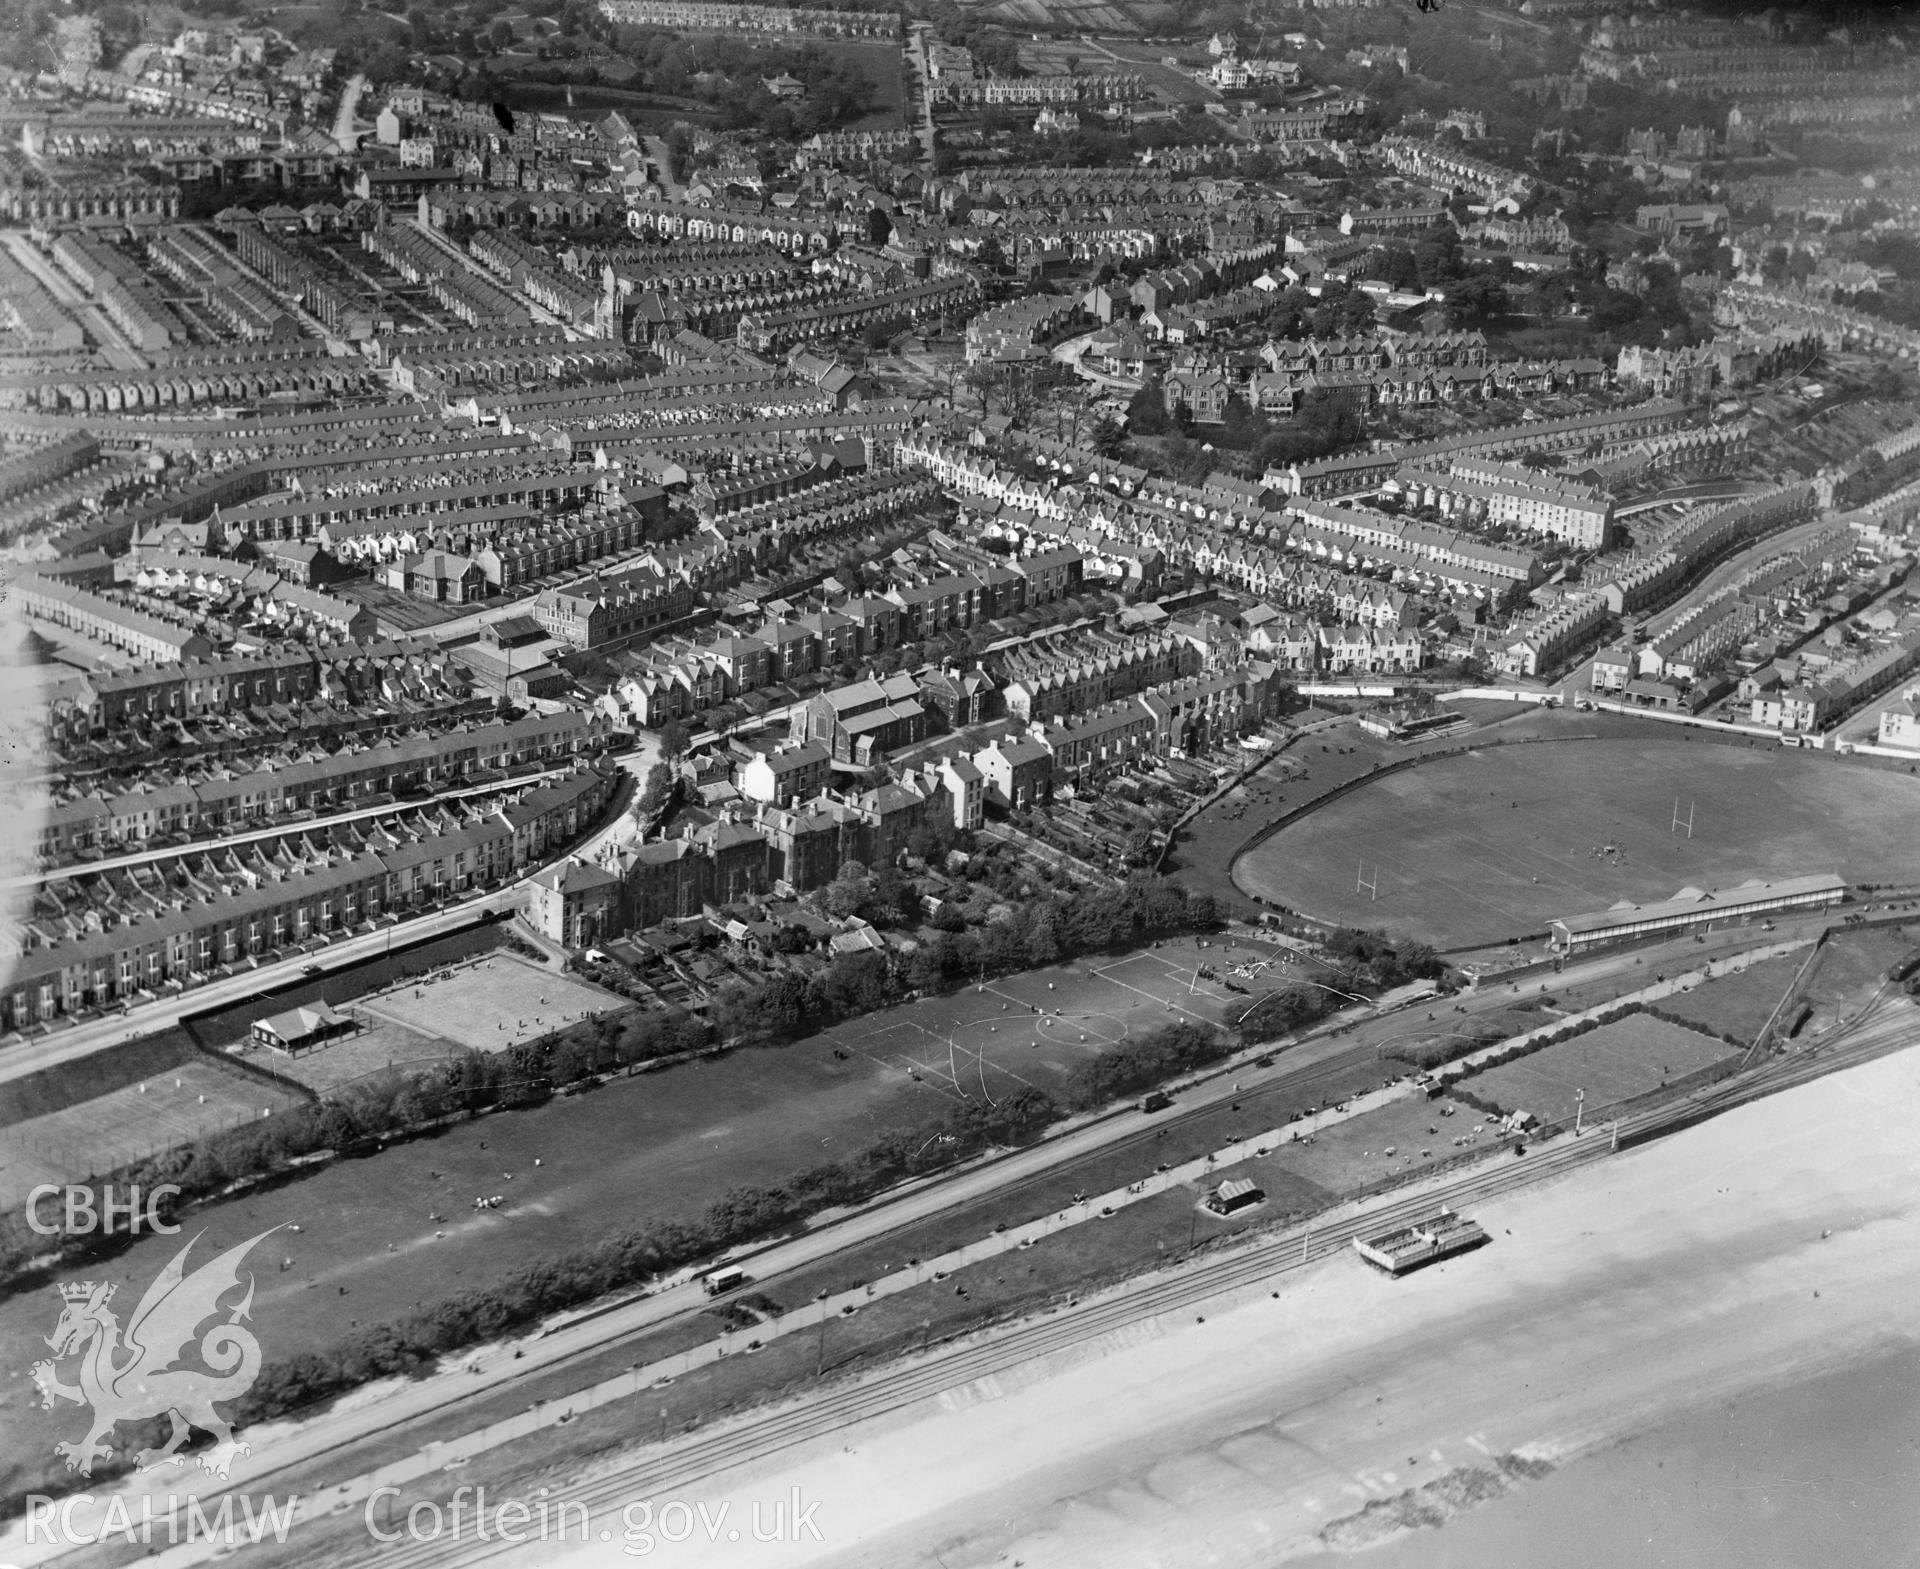 View of Swansea showing St Helen's sports ground with matches in progress, oblique aerial view. 5?x4? black and white glass plate negative.